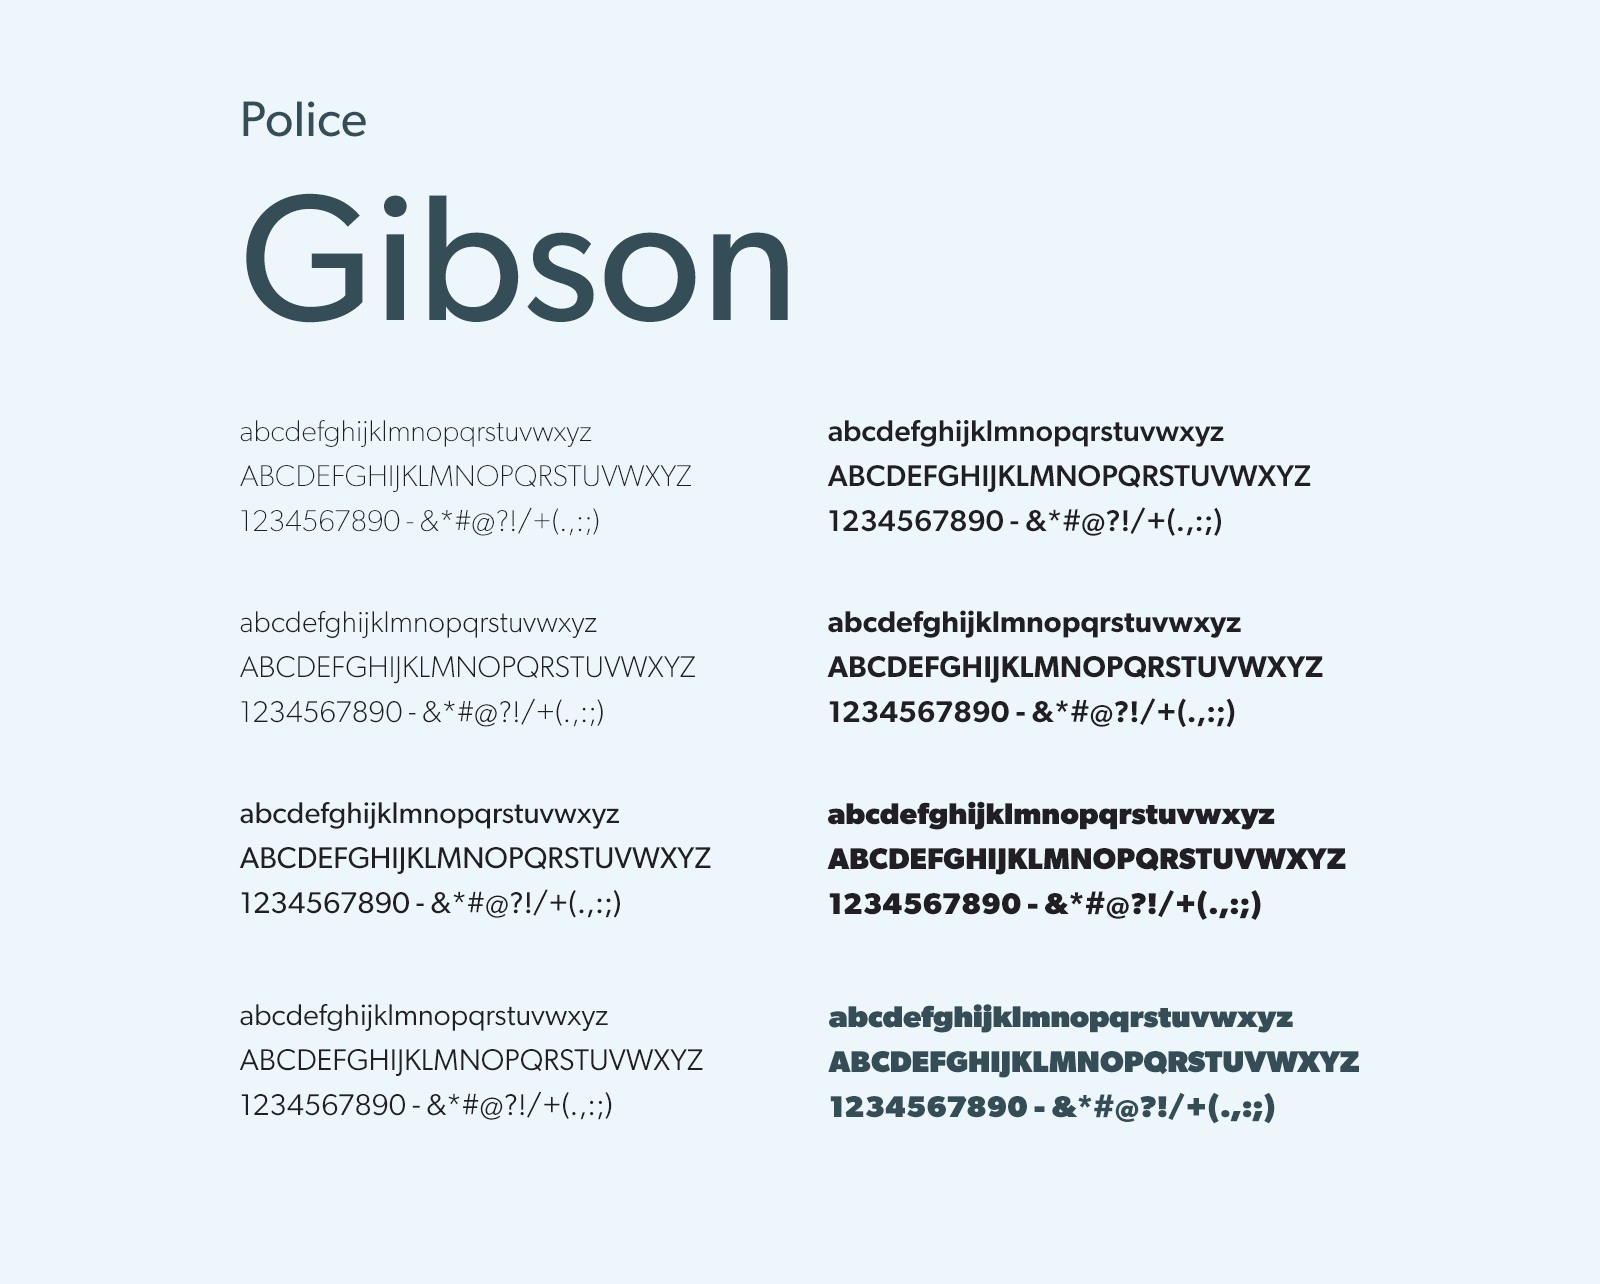 Police Gibson